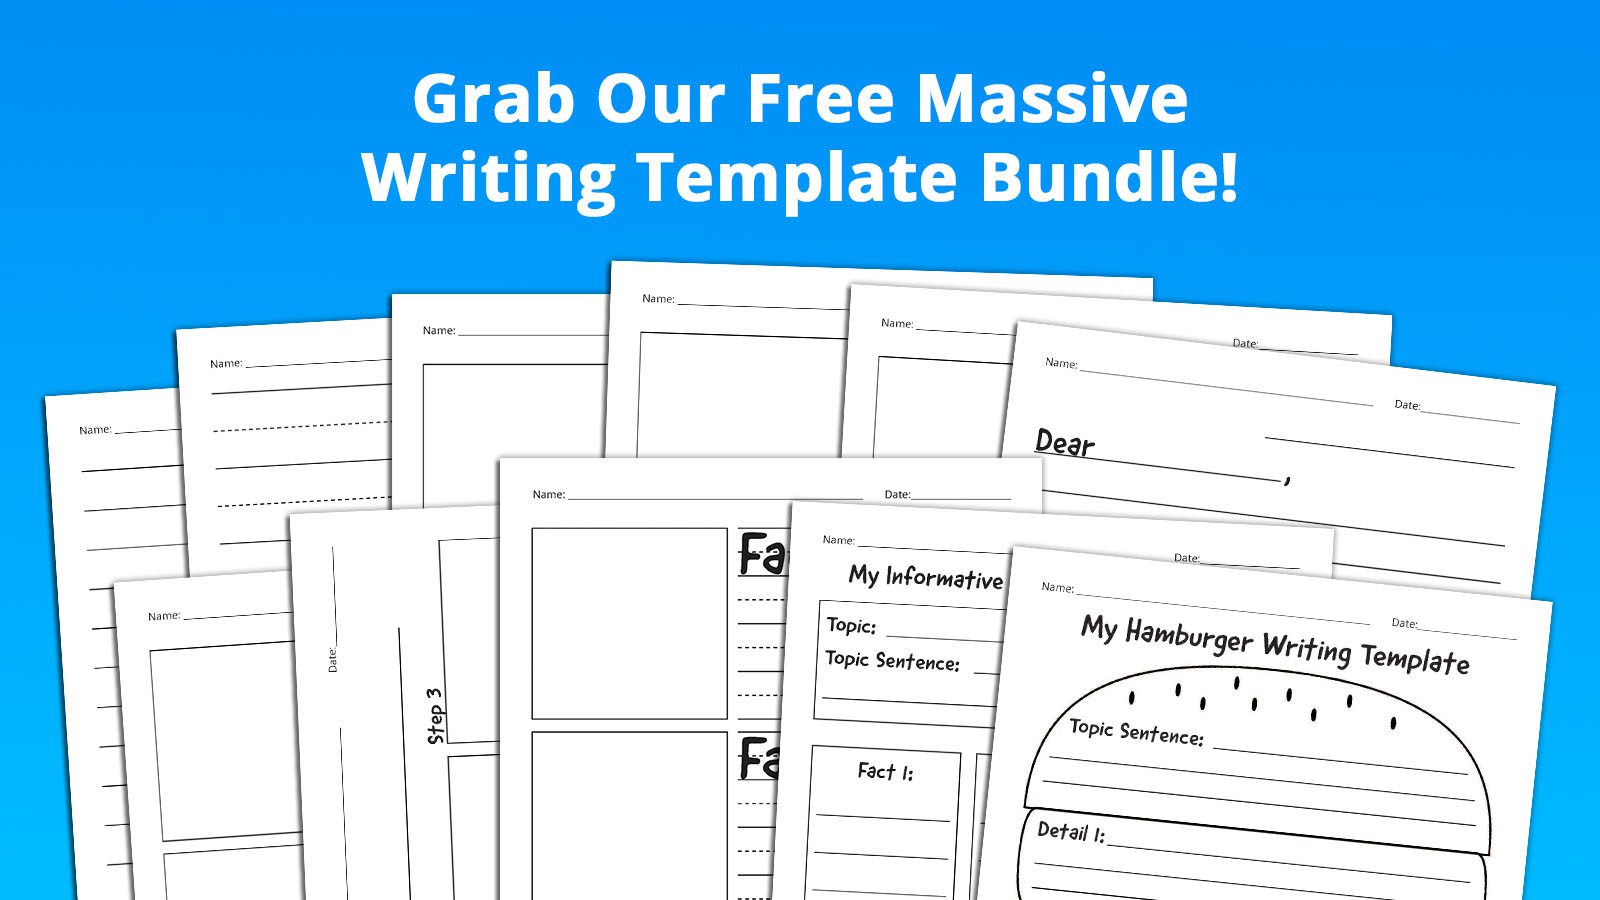 If You Teach Elementary School, You Need Our Massive Writing Template Bundle